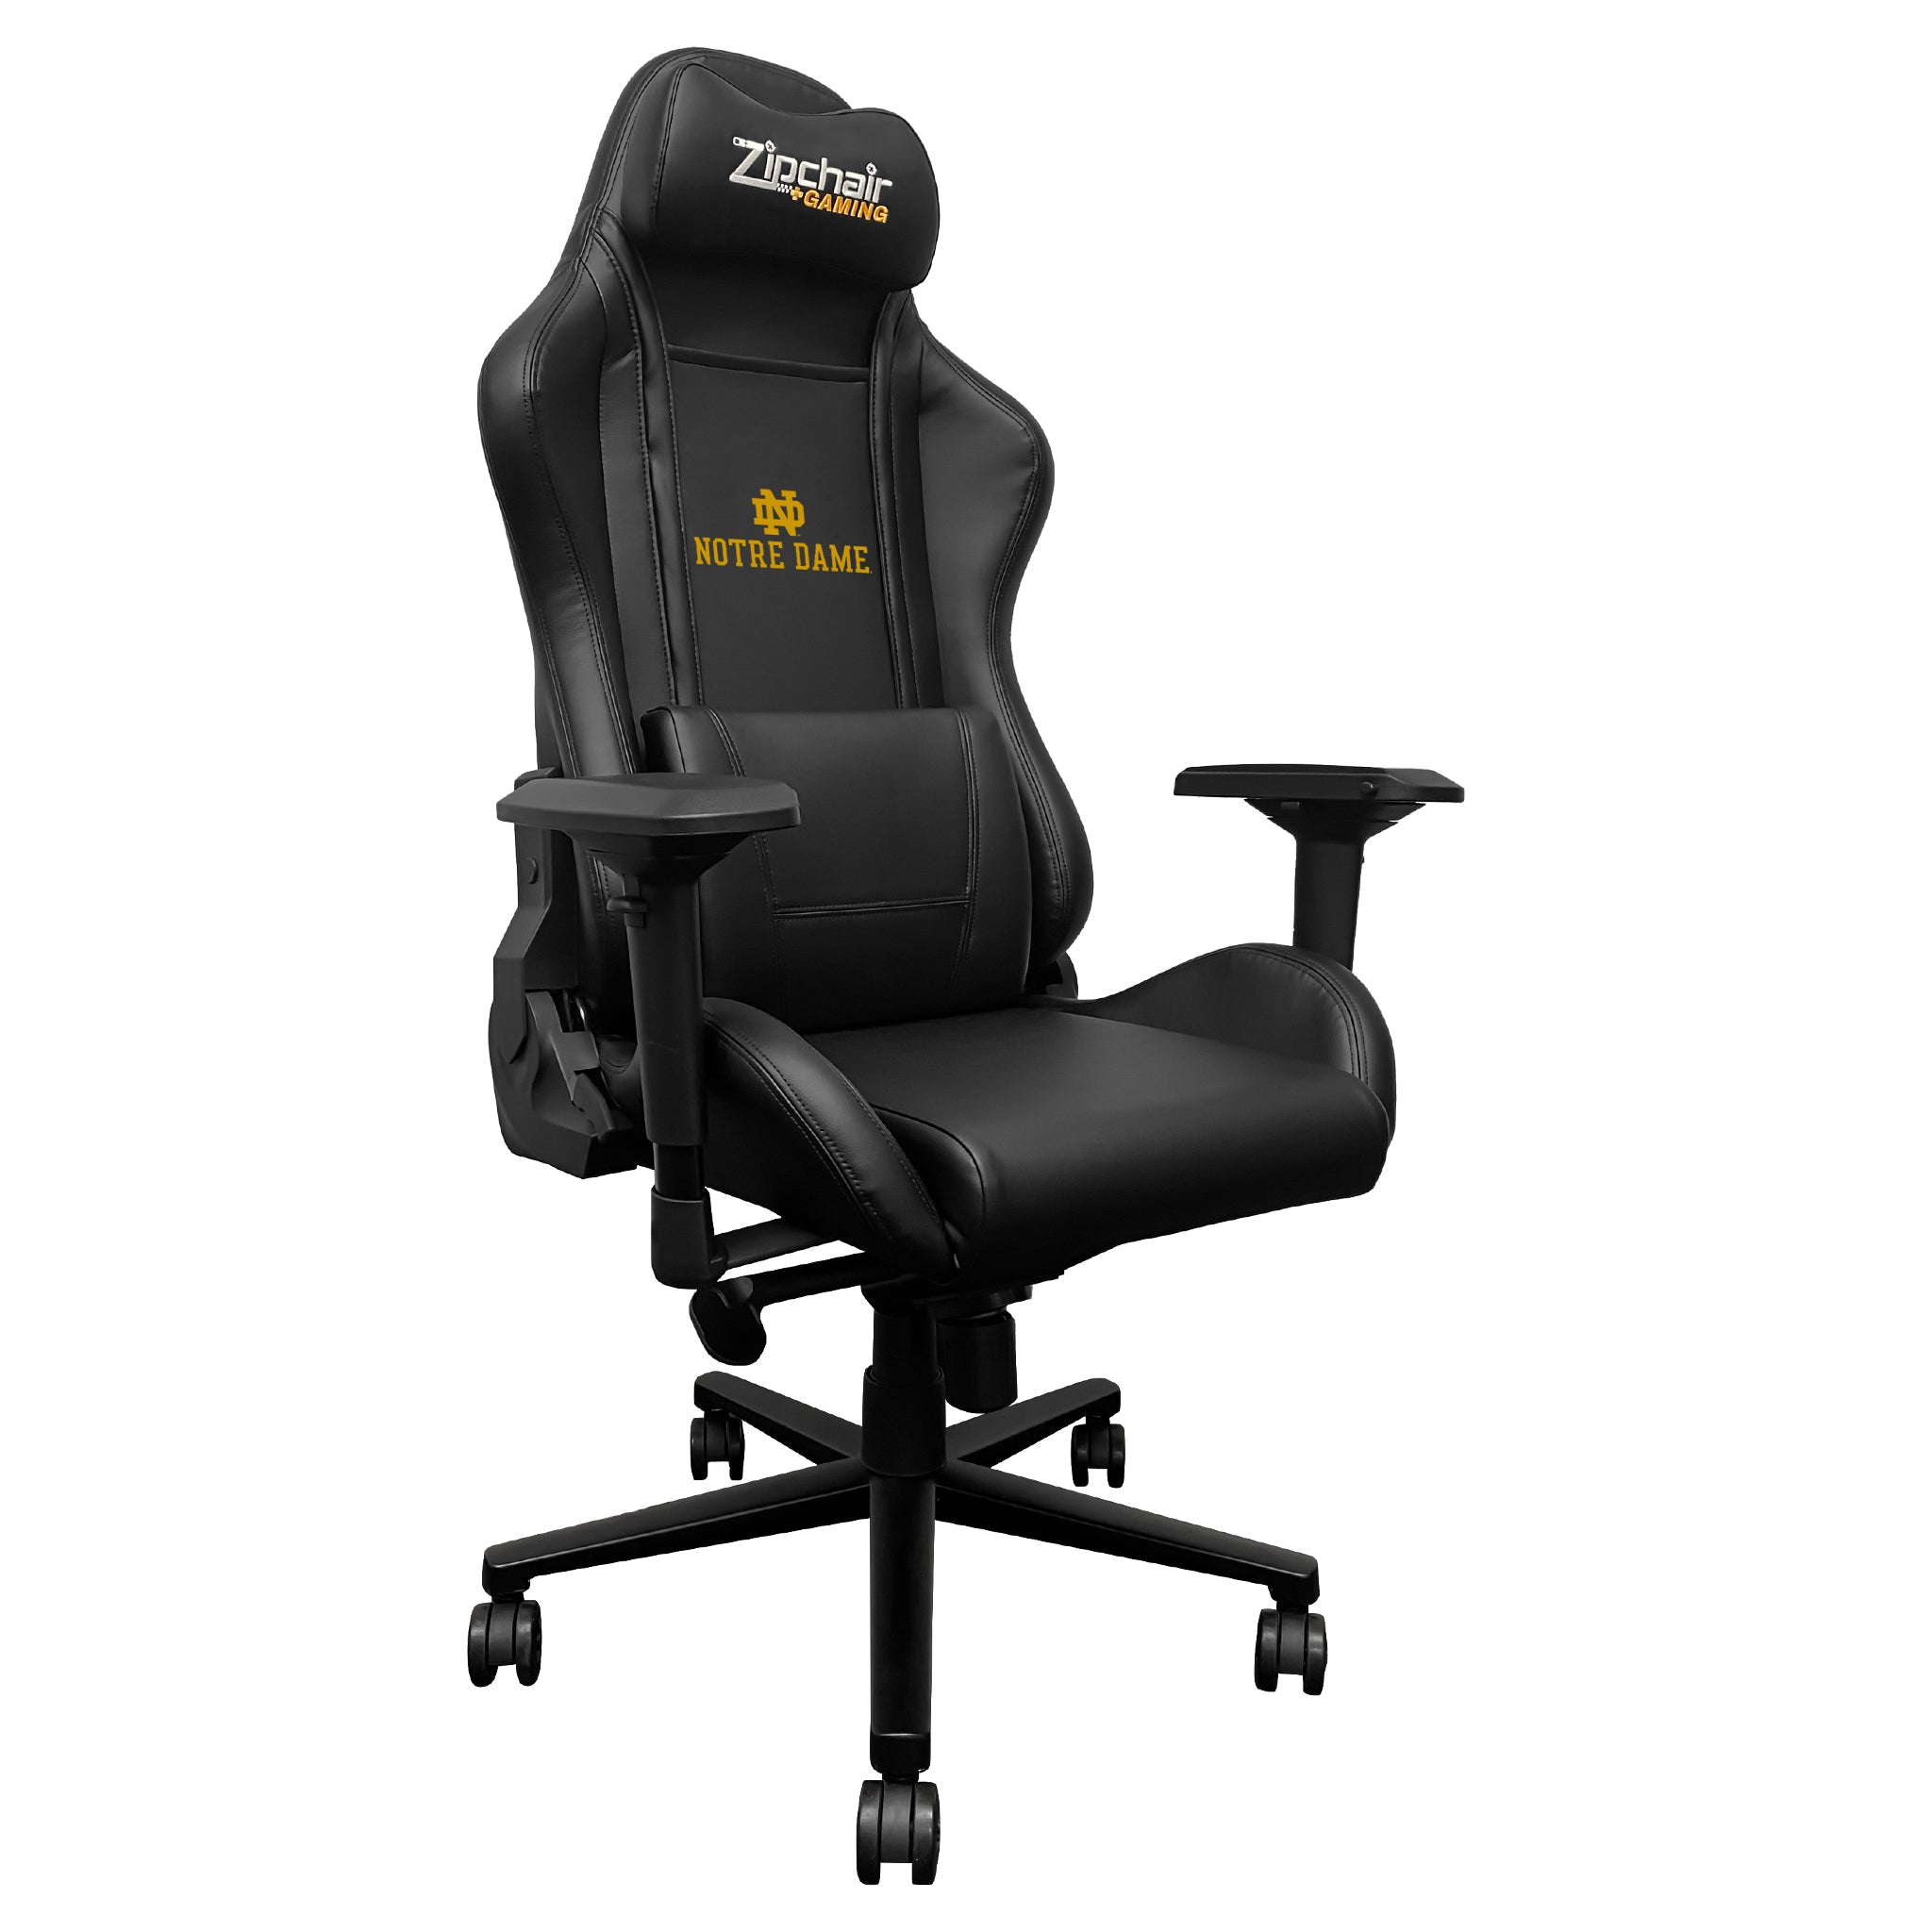 Notre Dame Xpression Gaming Chair with Notre Dame Wordmark Logo